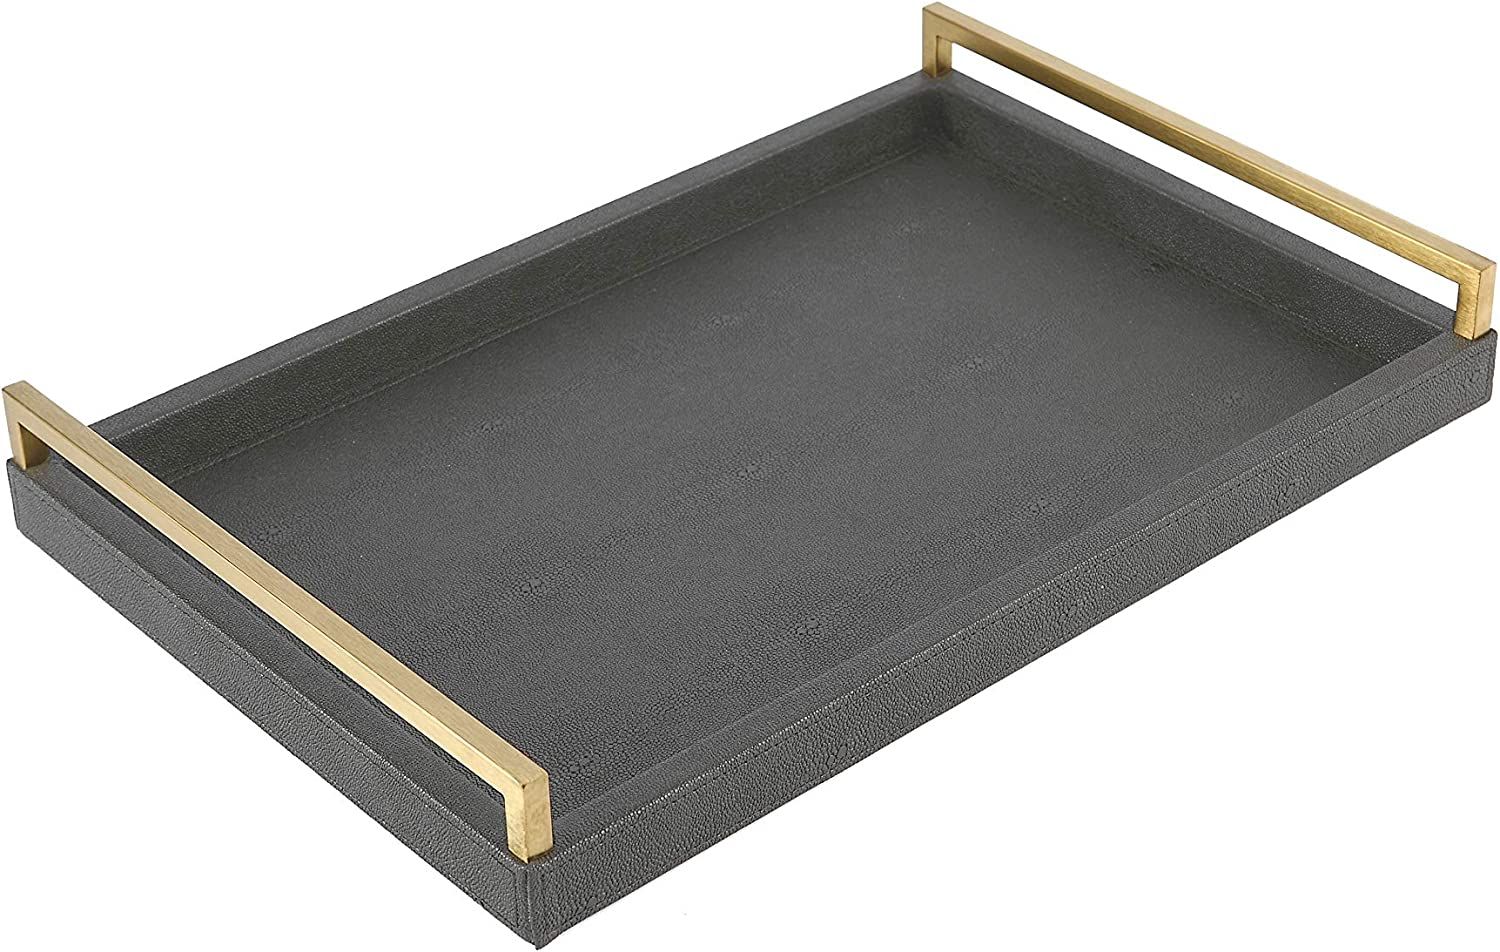 WV Decorative Tray Faux Shagreen Leather with Brushed Ti-Gold Stainless Steel Handle (Dark Grey) | Amazon (US)